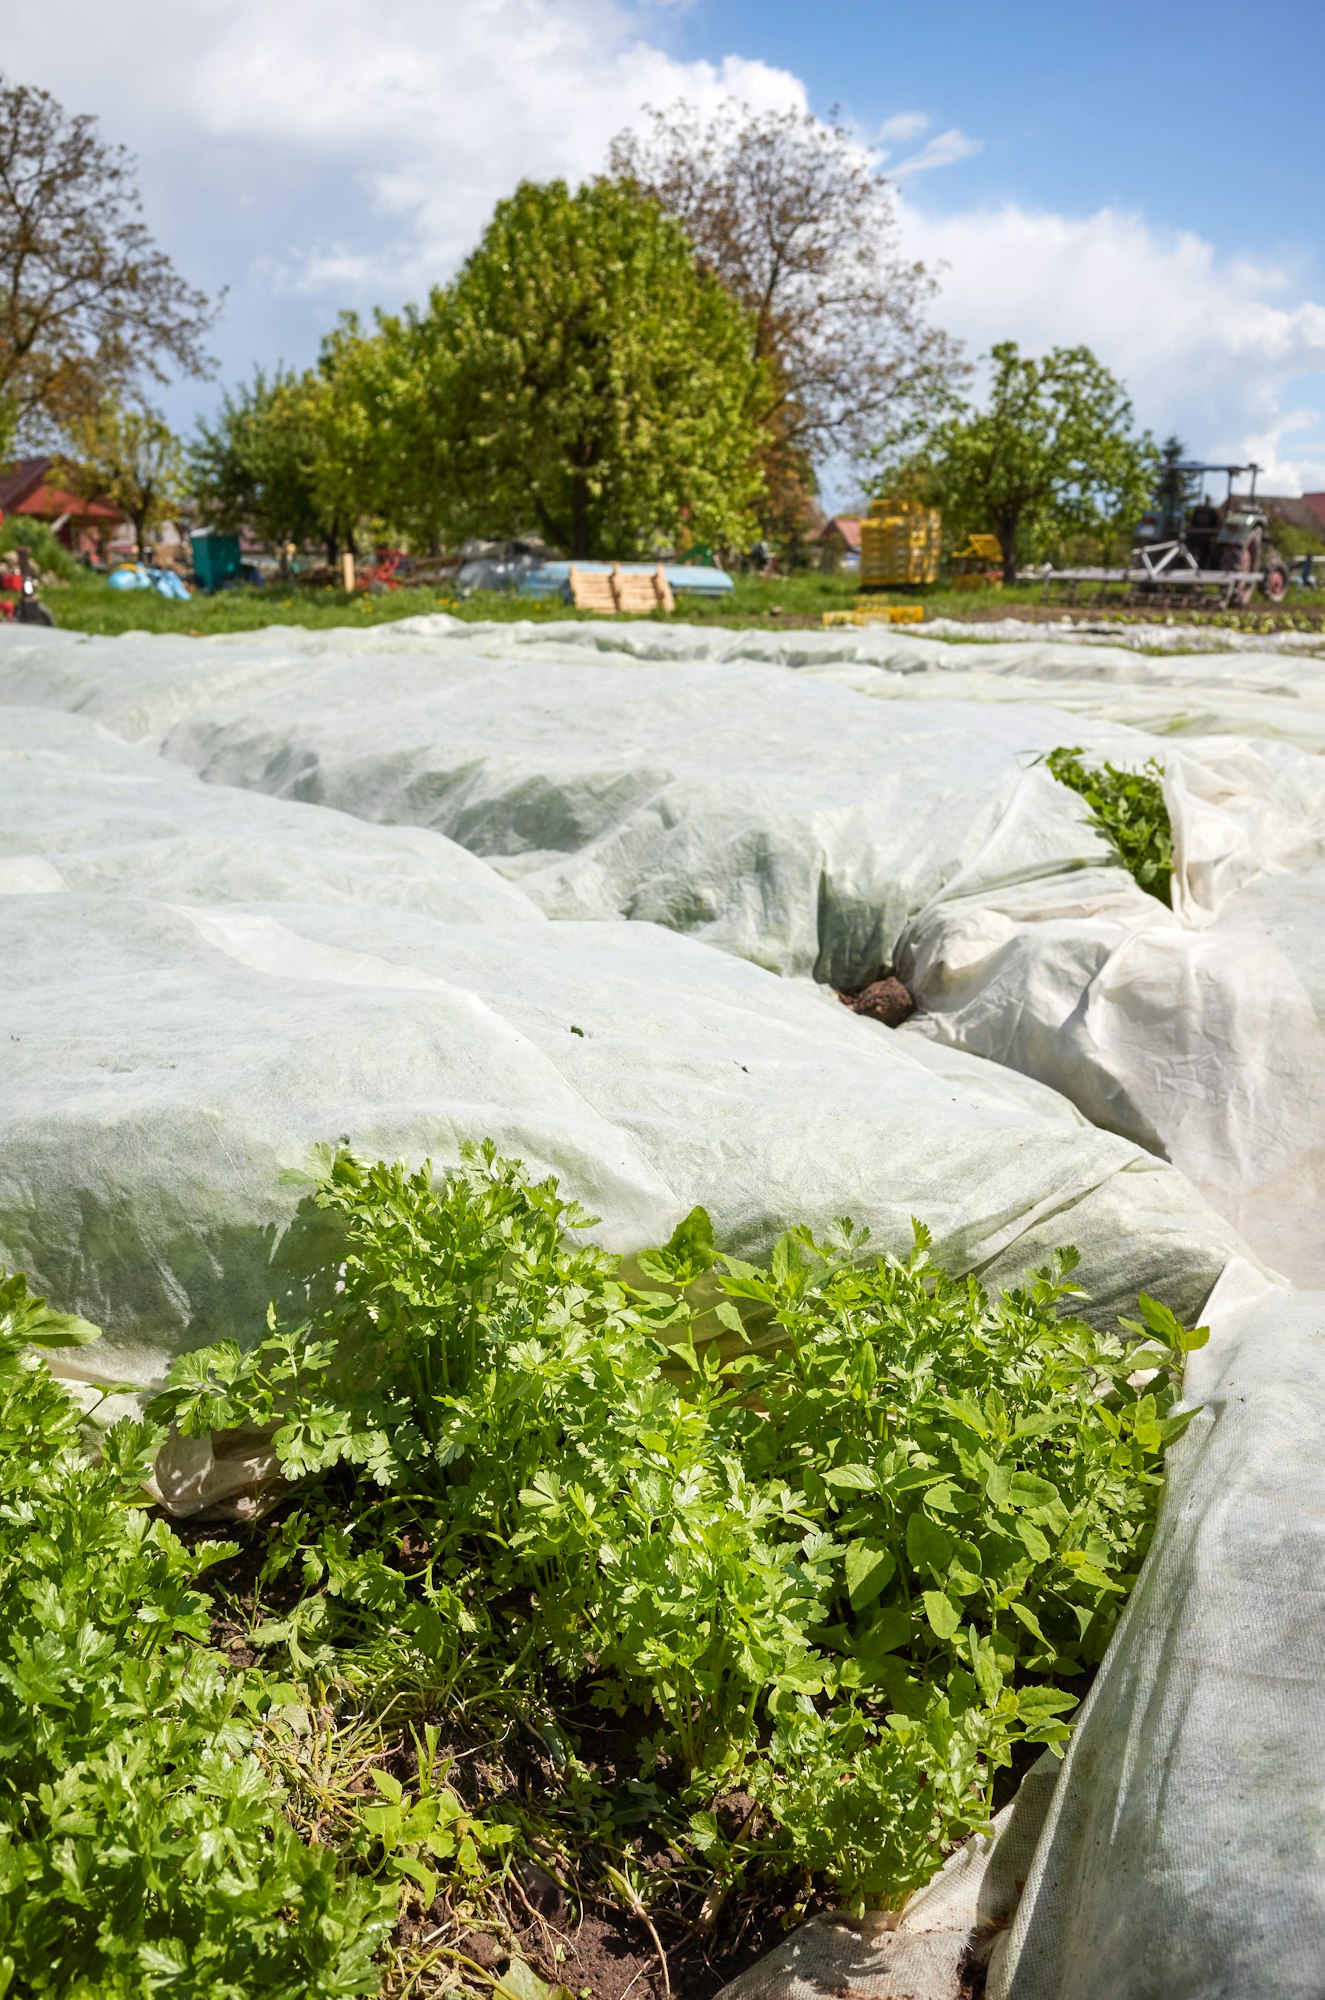 Organic vegetable farm with nonwoven agrotextile covering plants.